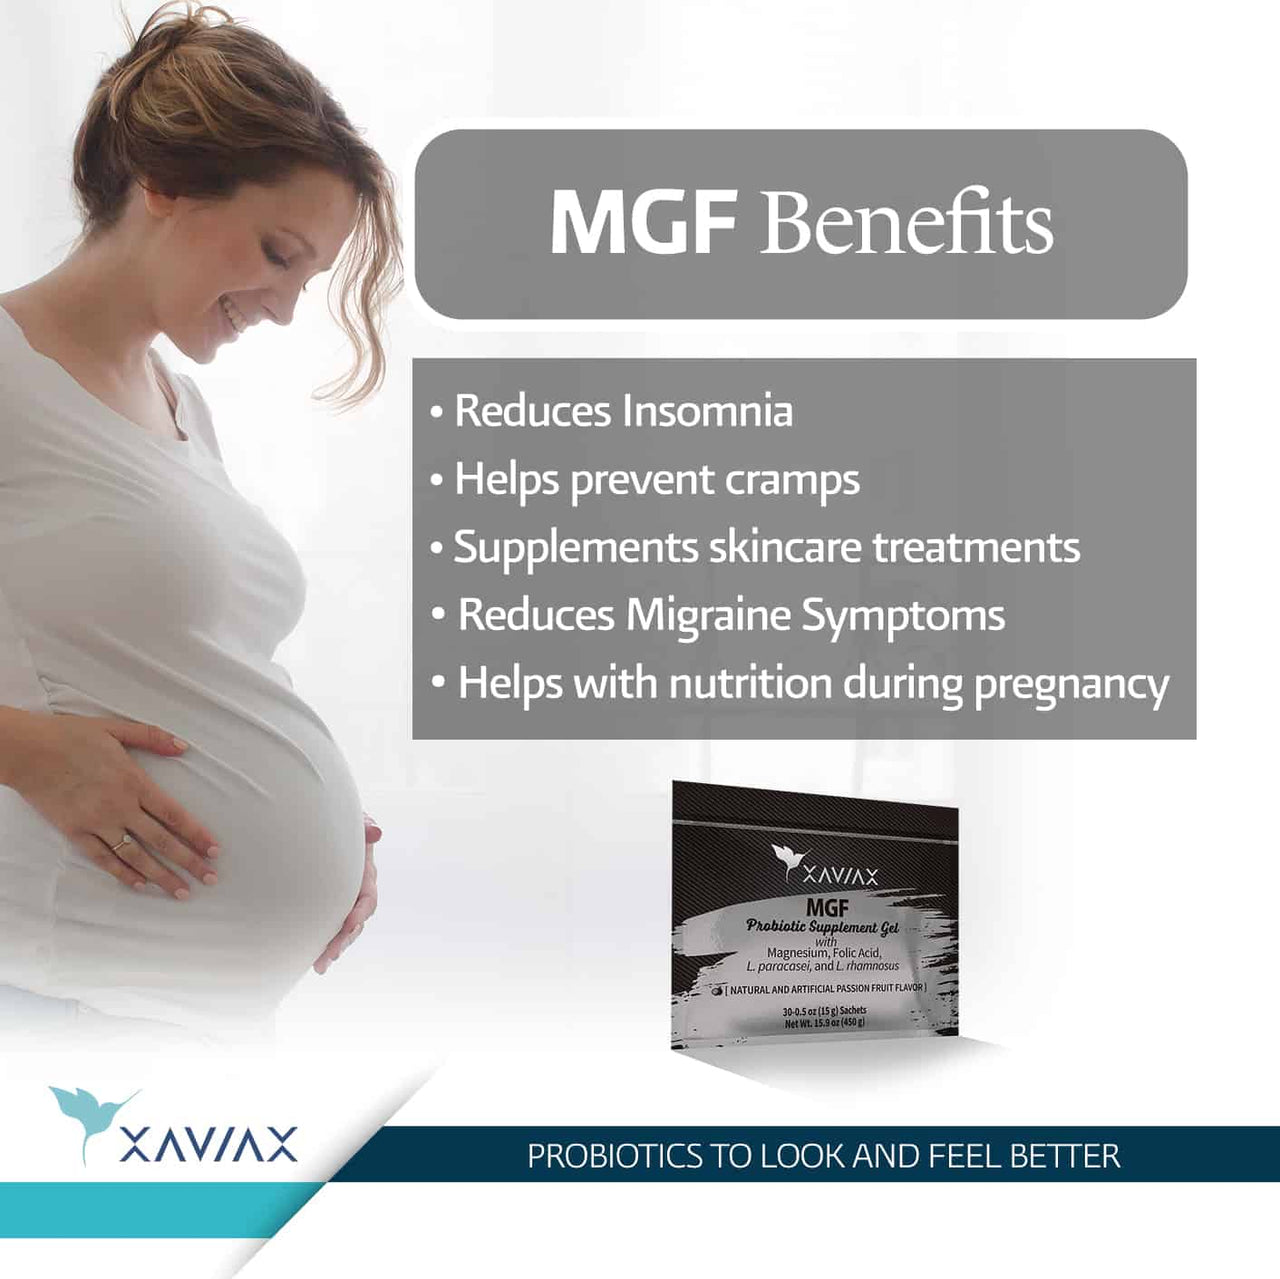 mgf benefits reduces insomnia